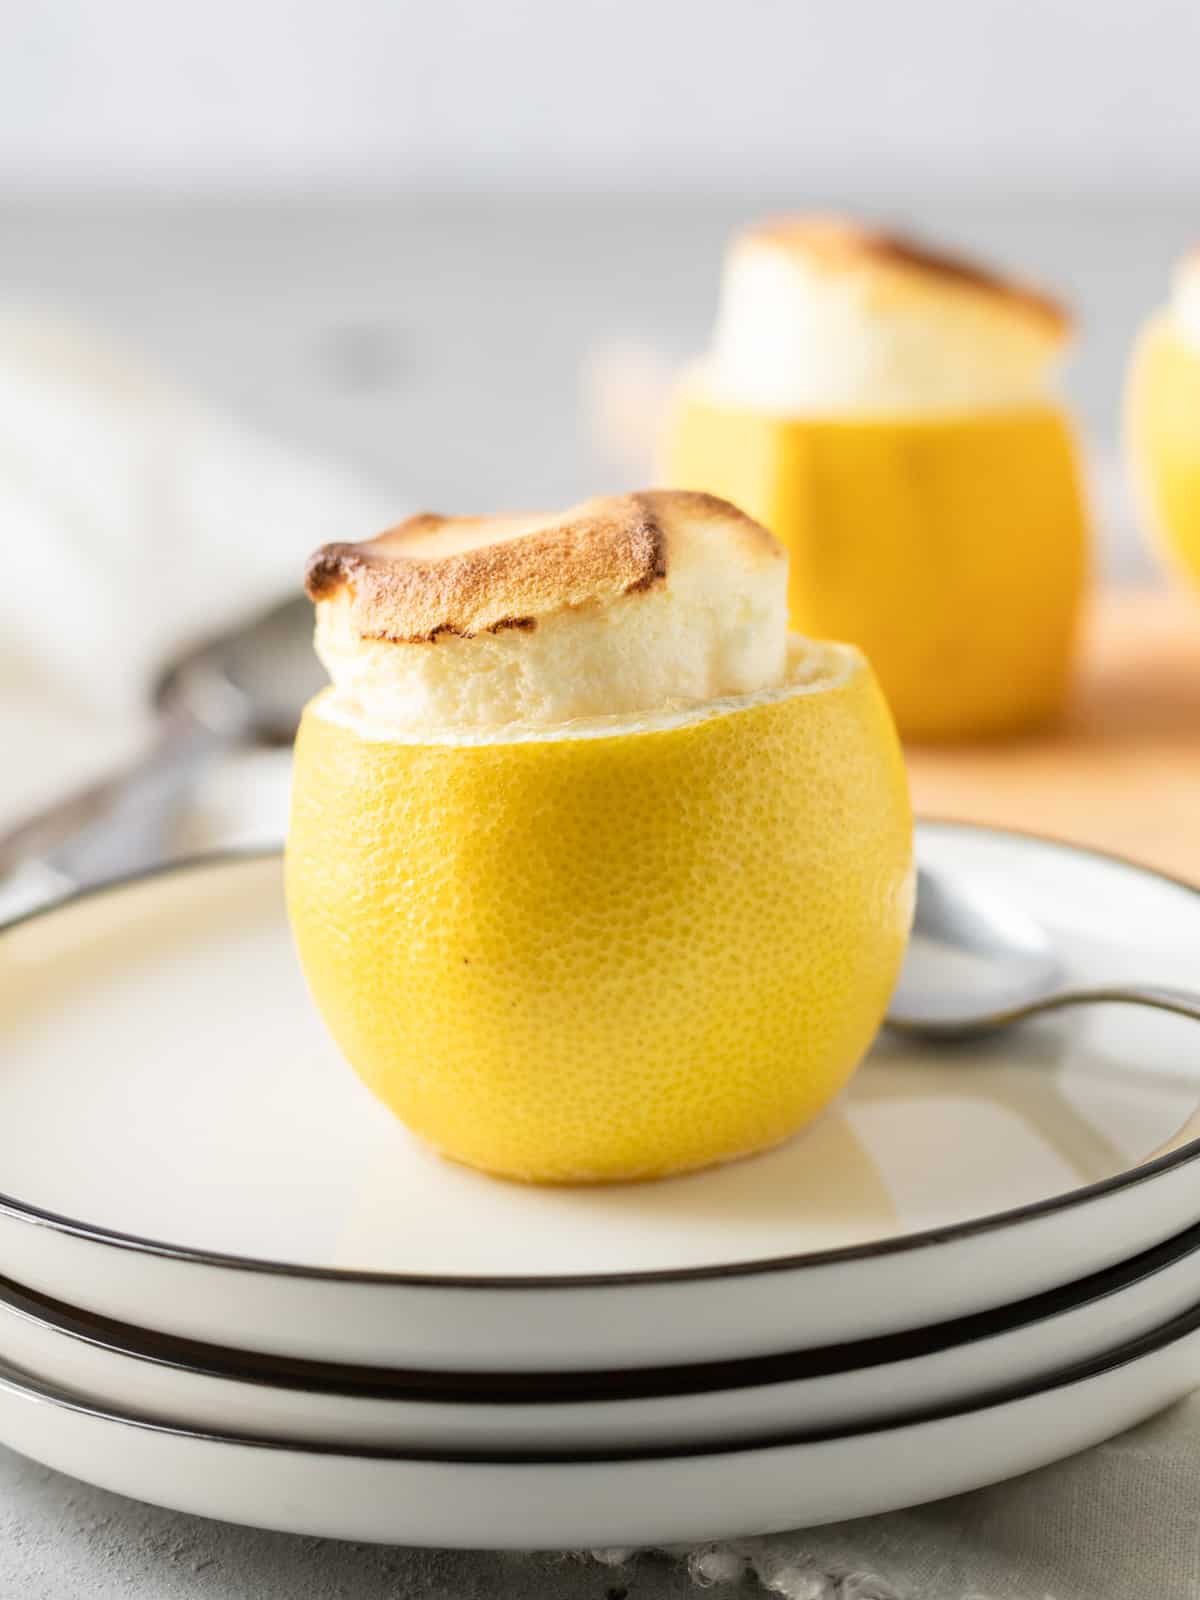 A lemon soufflé on a white plate with other soufflés behind it